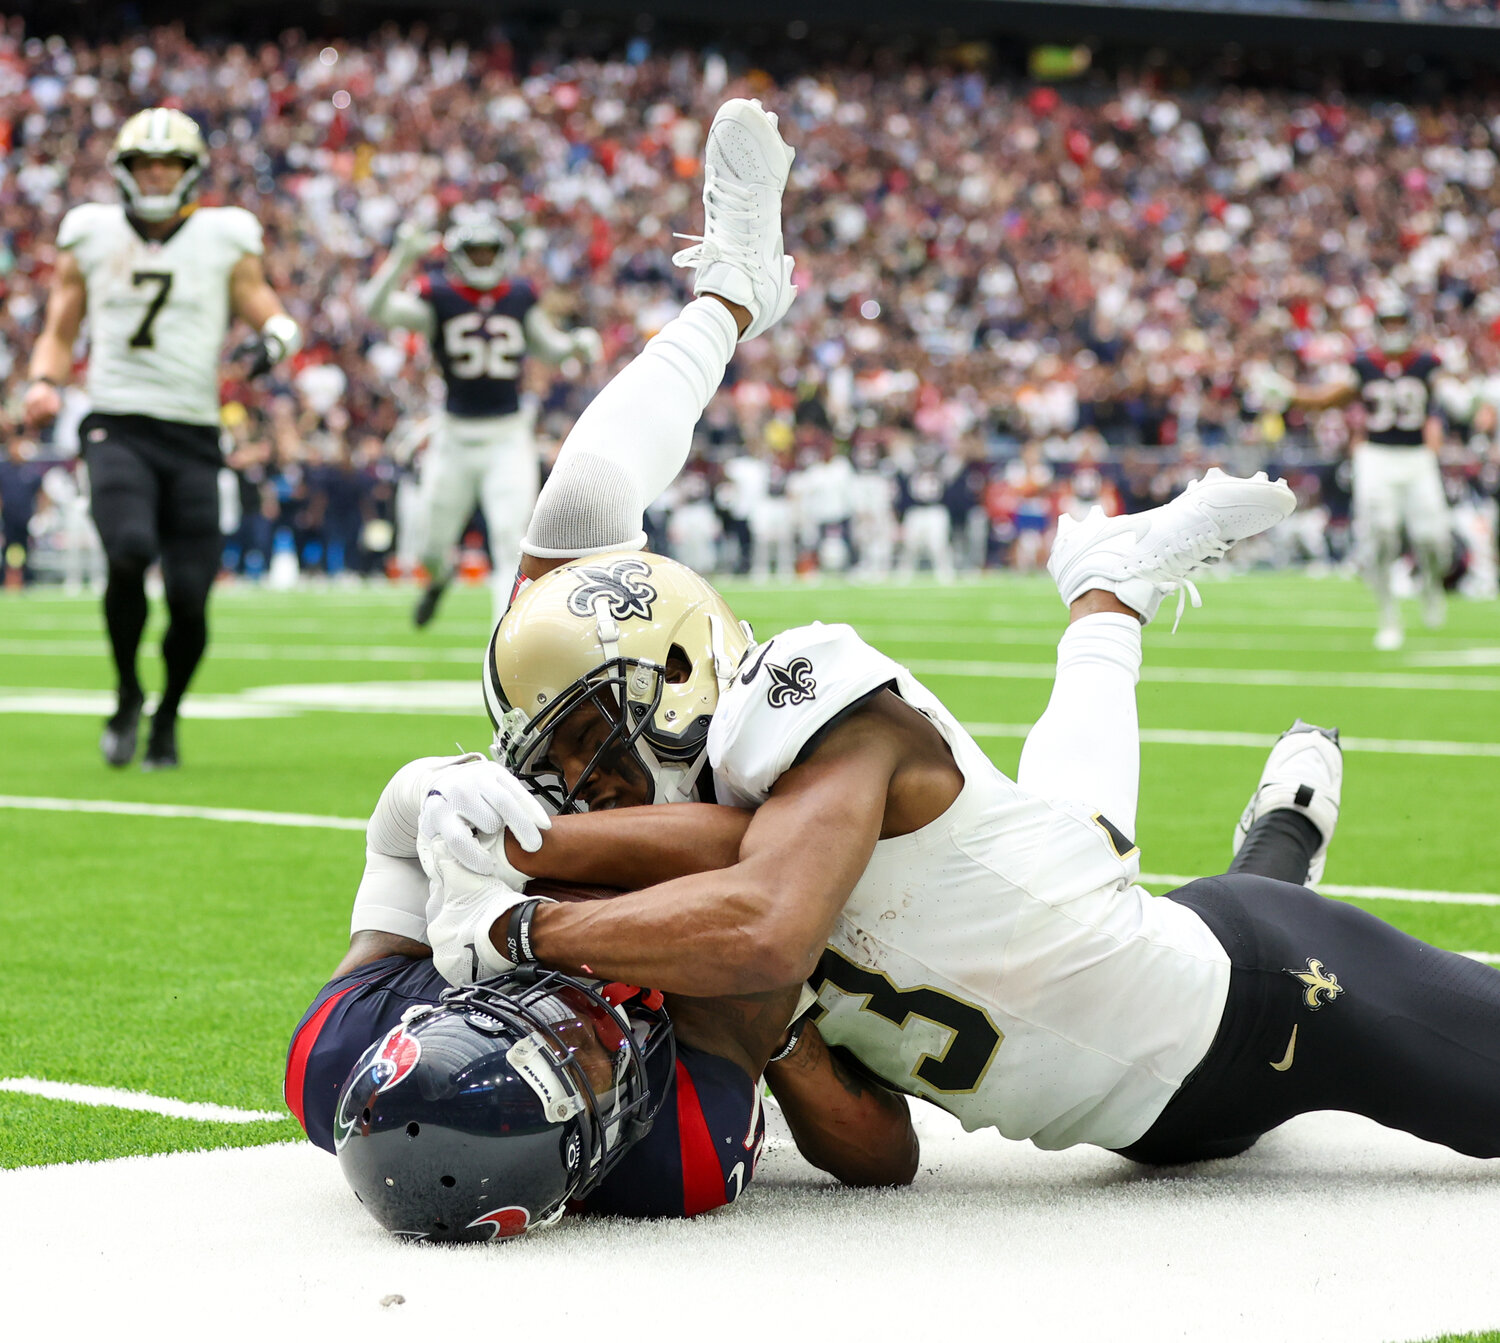 Texans wide receiver Robert Woods (2) makes an interception to end the Saints’ final drive in the fourth quarter and seal a 20-13 victory for the Texans during an NFL game on October 15, 2023 in Houston.